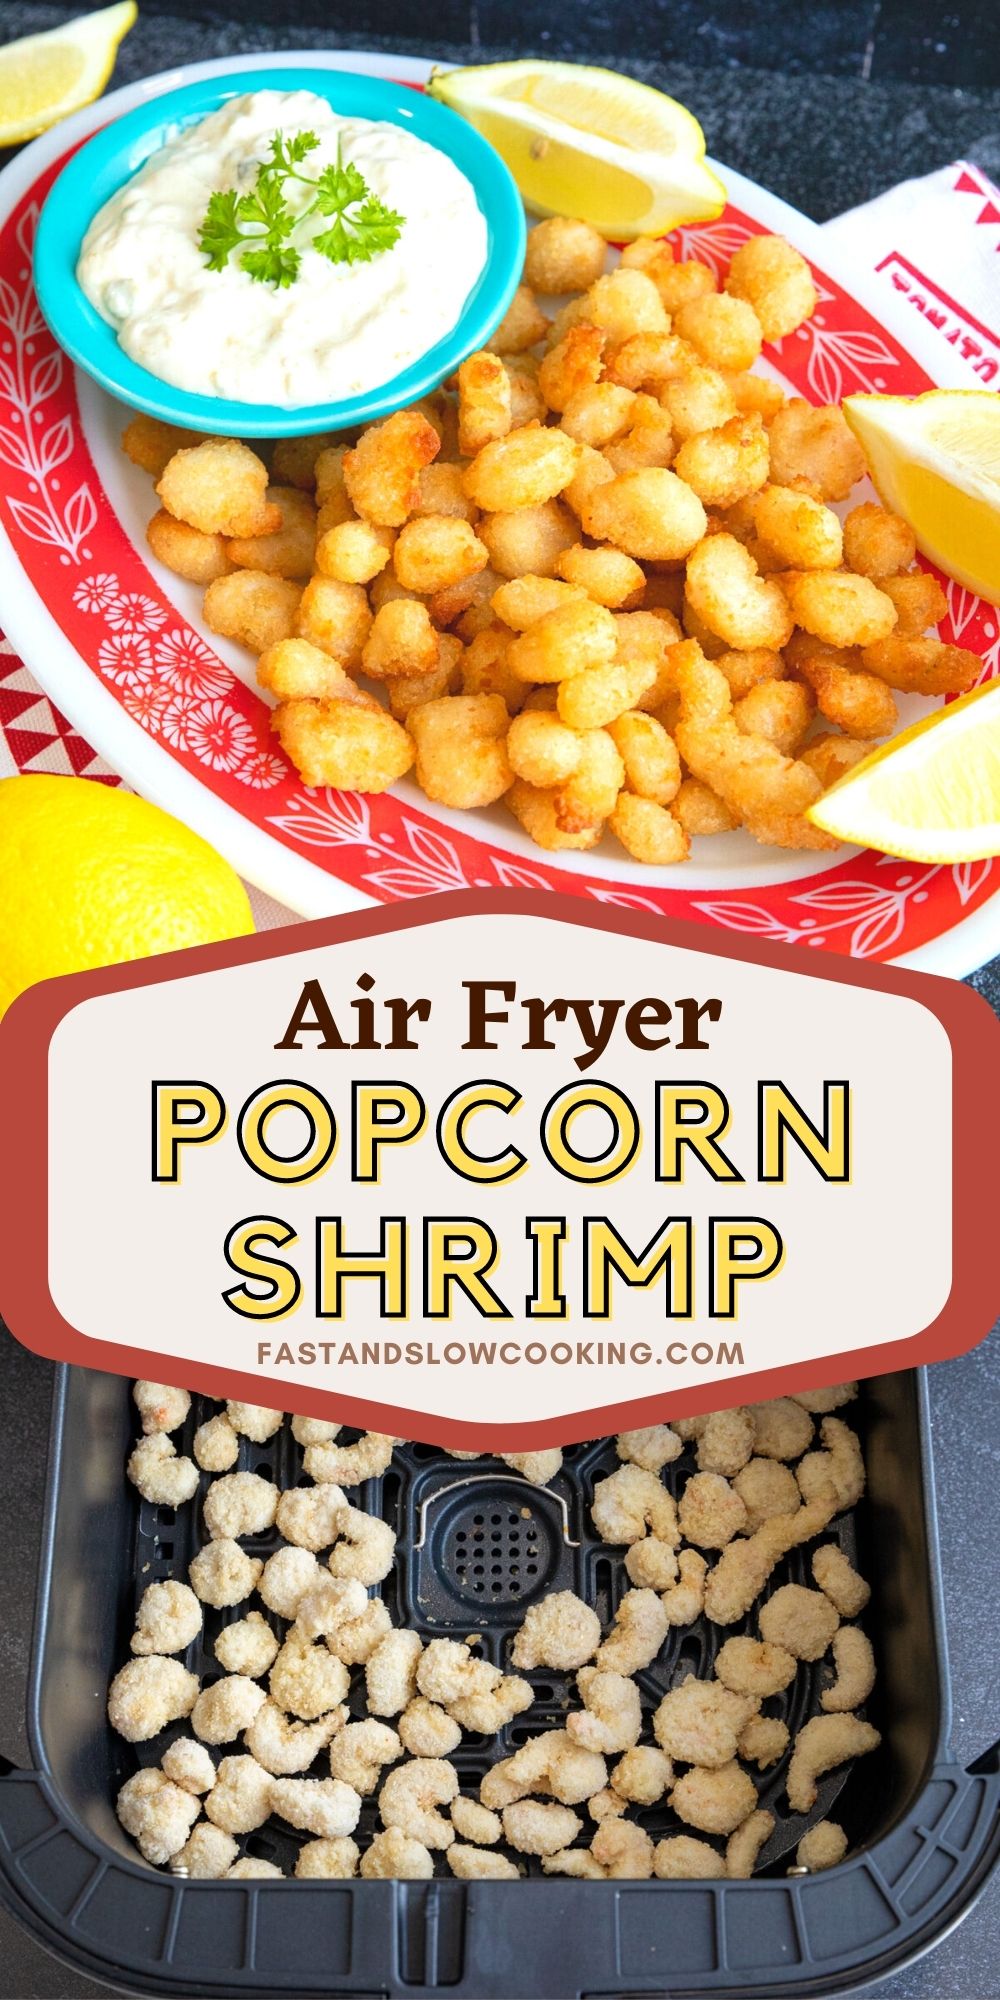 Quick and easy air fryer frozen popcorn shrimp. If you need a quick appetizer for friends or family, this is a simple and easy method to preparing without heating up your house by using your oven.